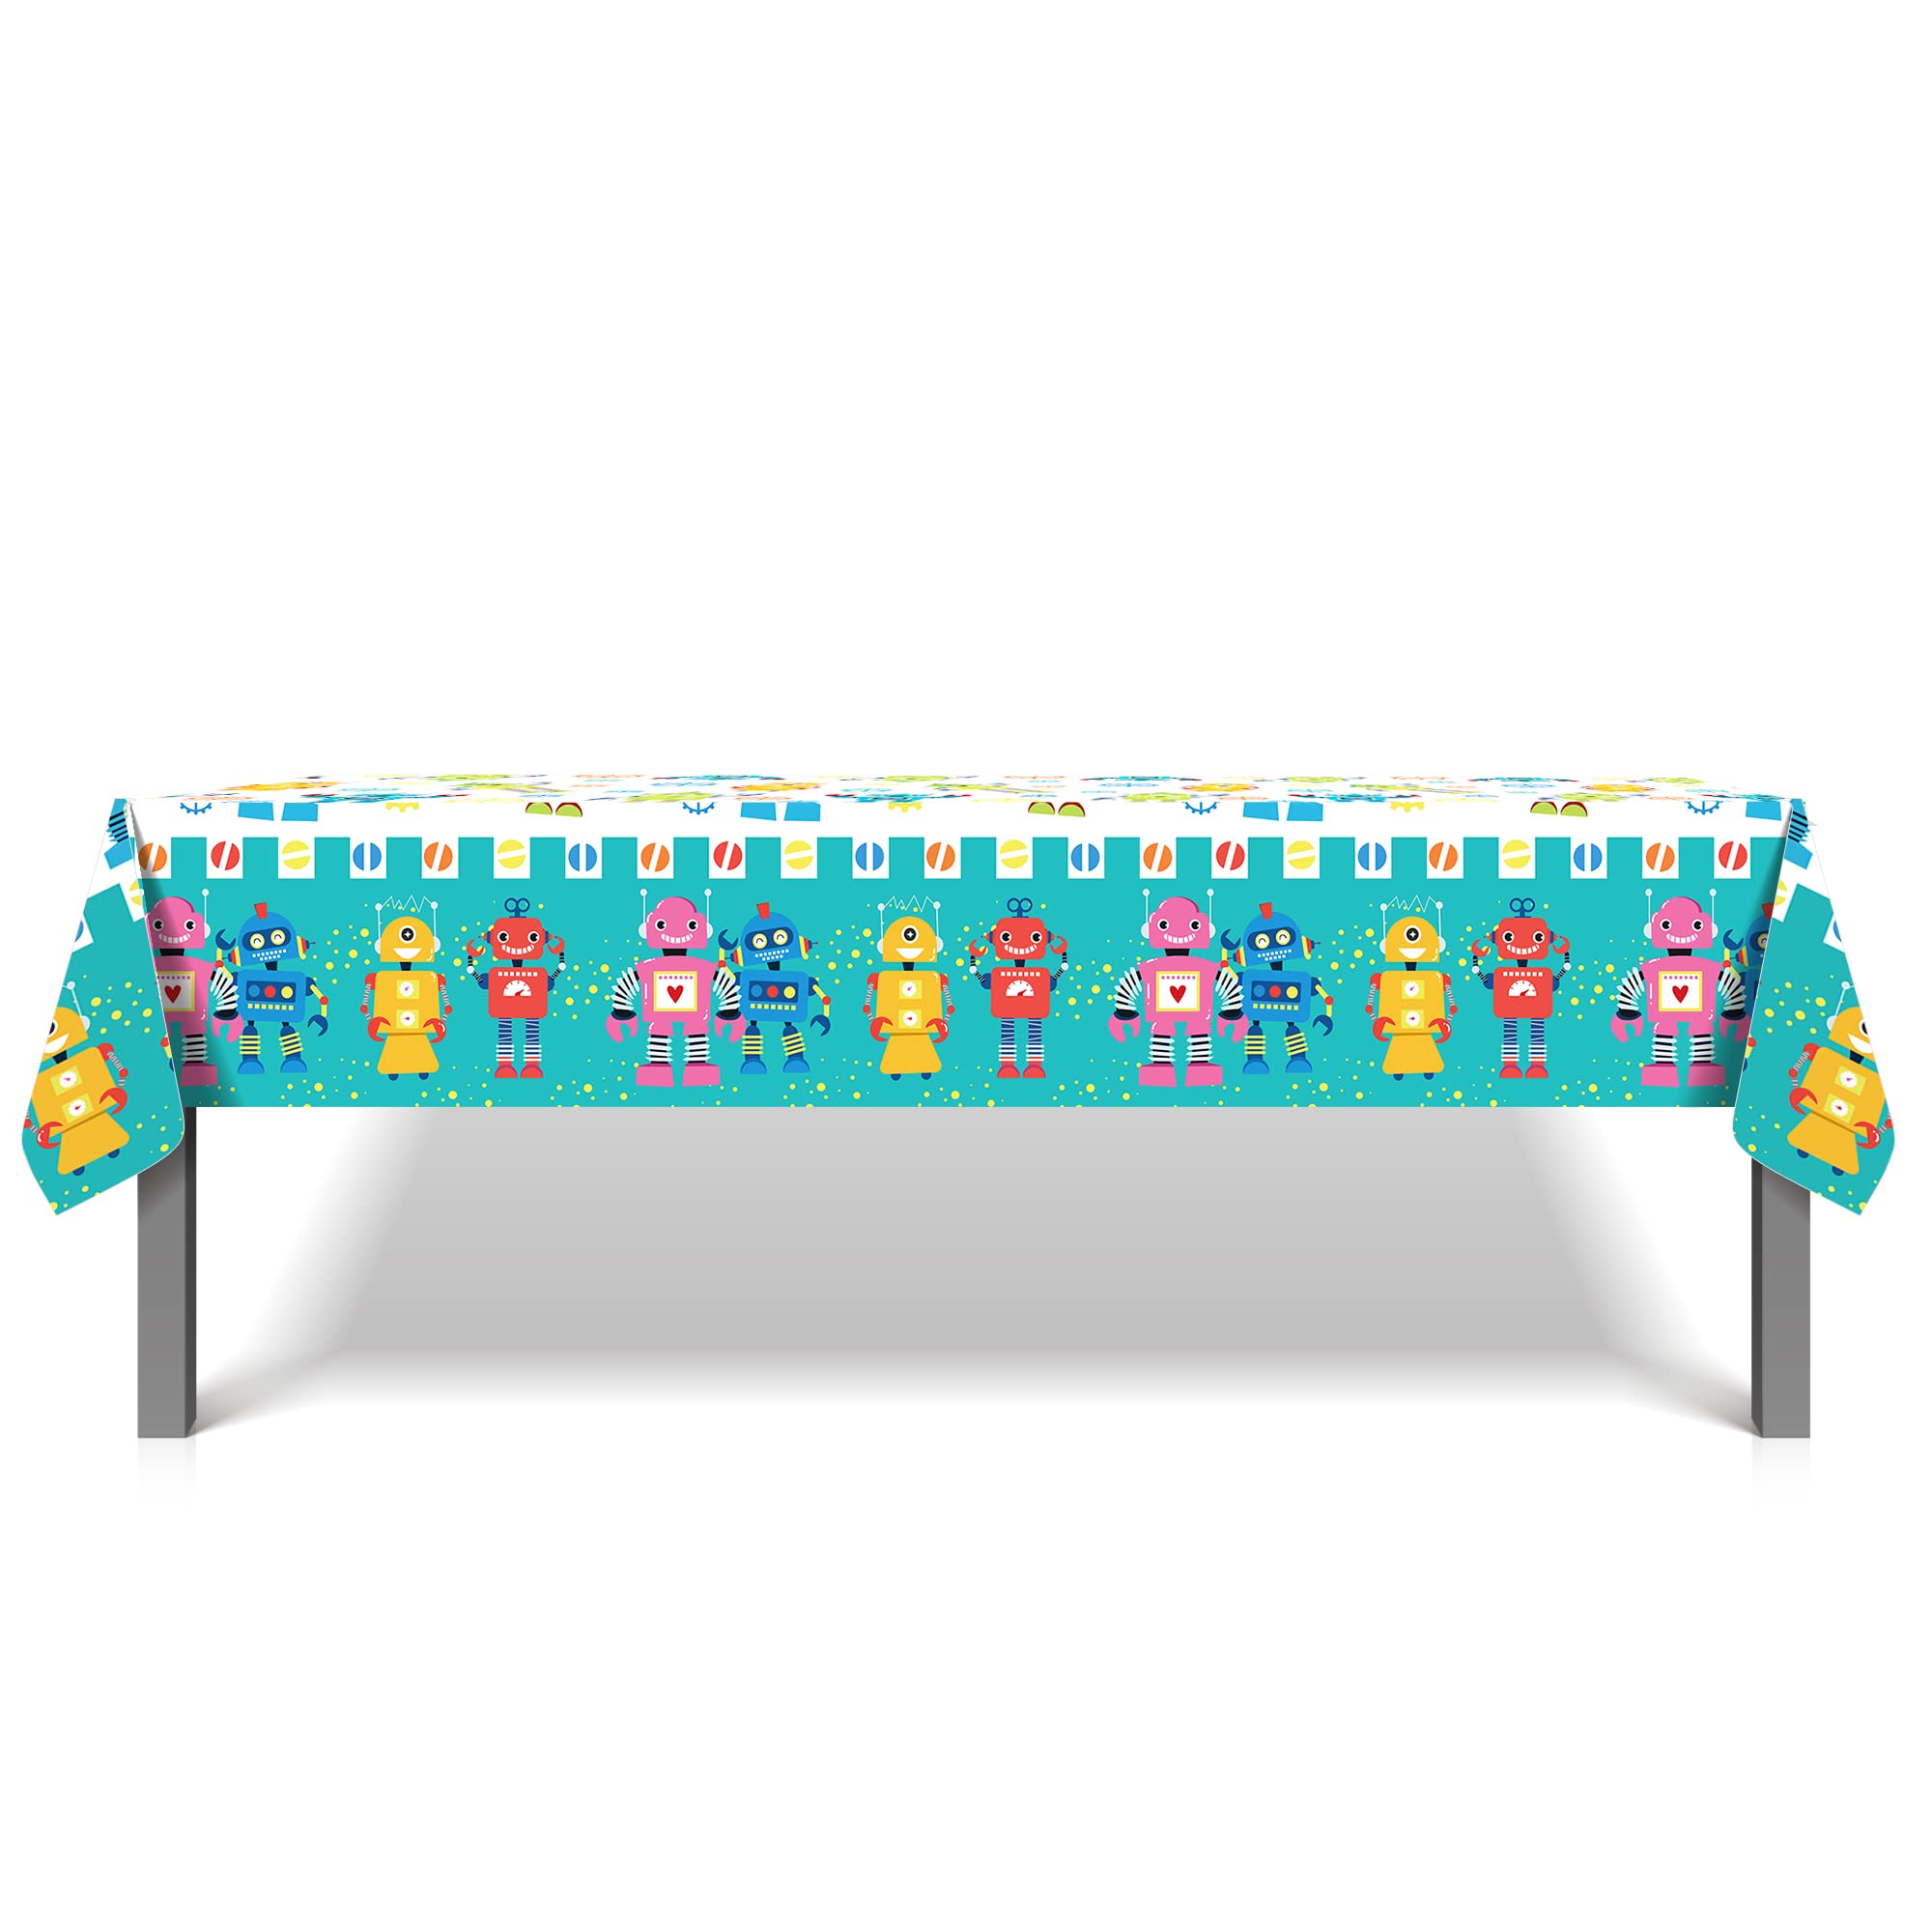 Robot Party Supplies 2Pcs Plastic Tablecloth Waterproof Table Cover Robots Tablecloth Robot Cartoon Tablecloth for Robot Birthday Party, Robots Theme Party Baby Shower Decoration,54 x 87In